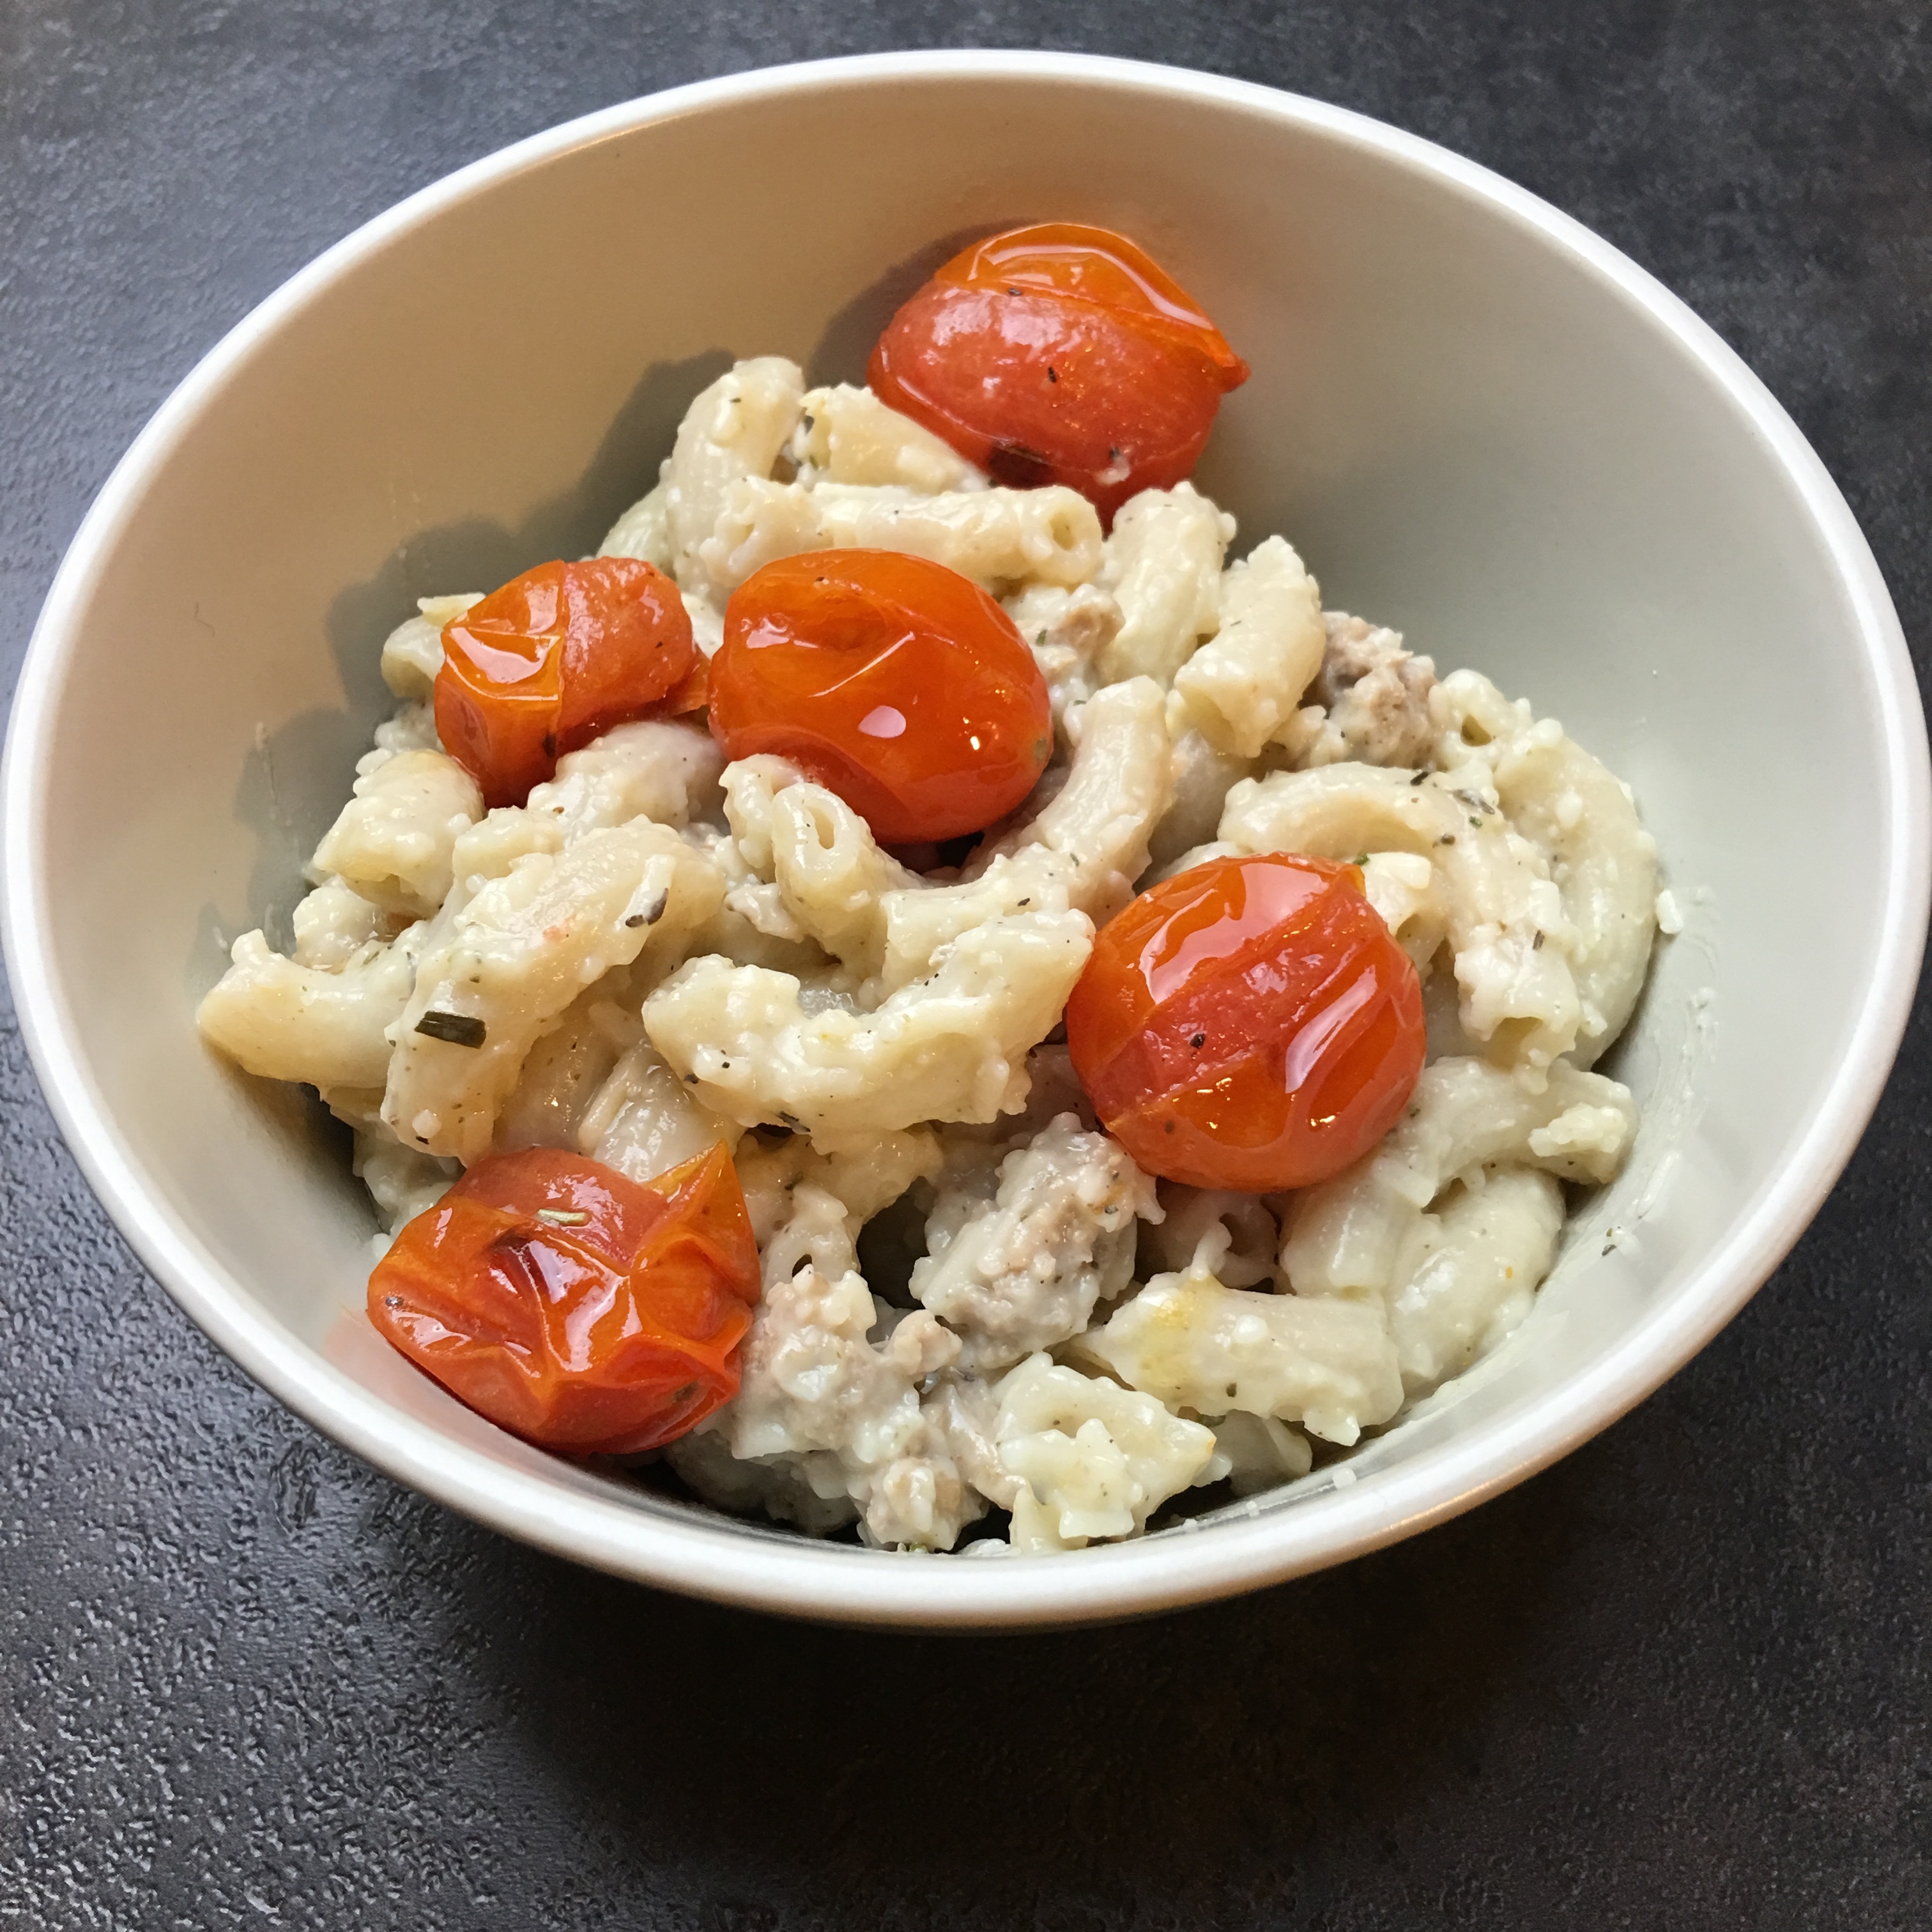 Allergy Free, Organic Blistered Tomatoes & Pasta by The Allergy Chef